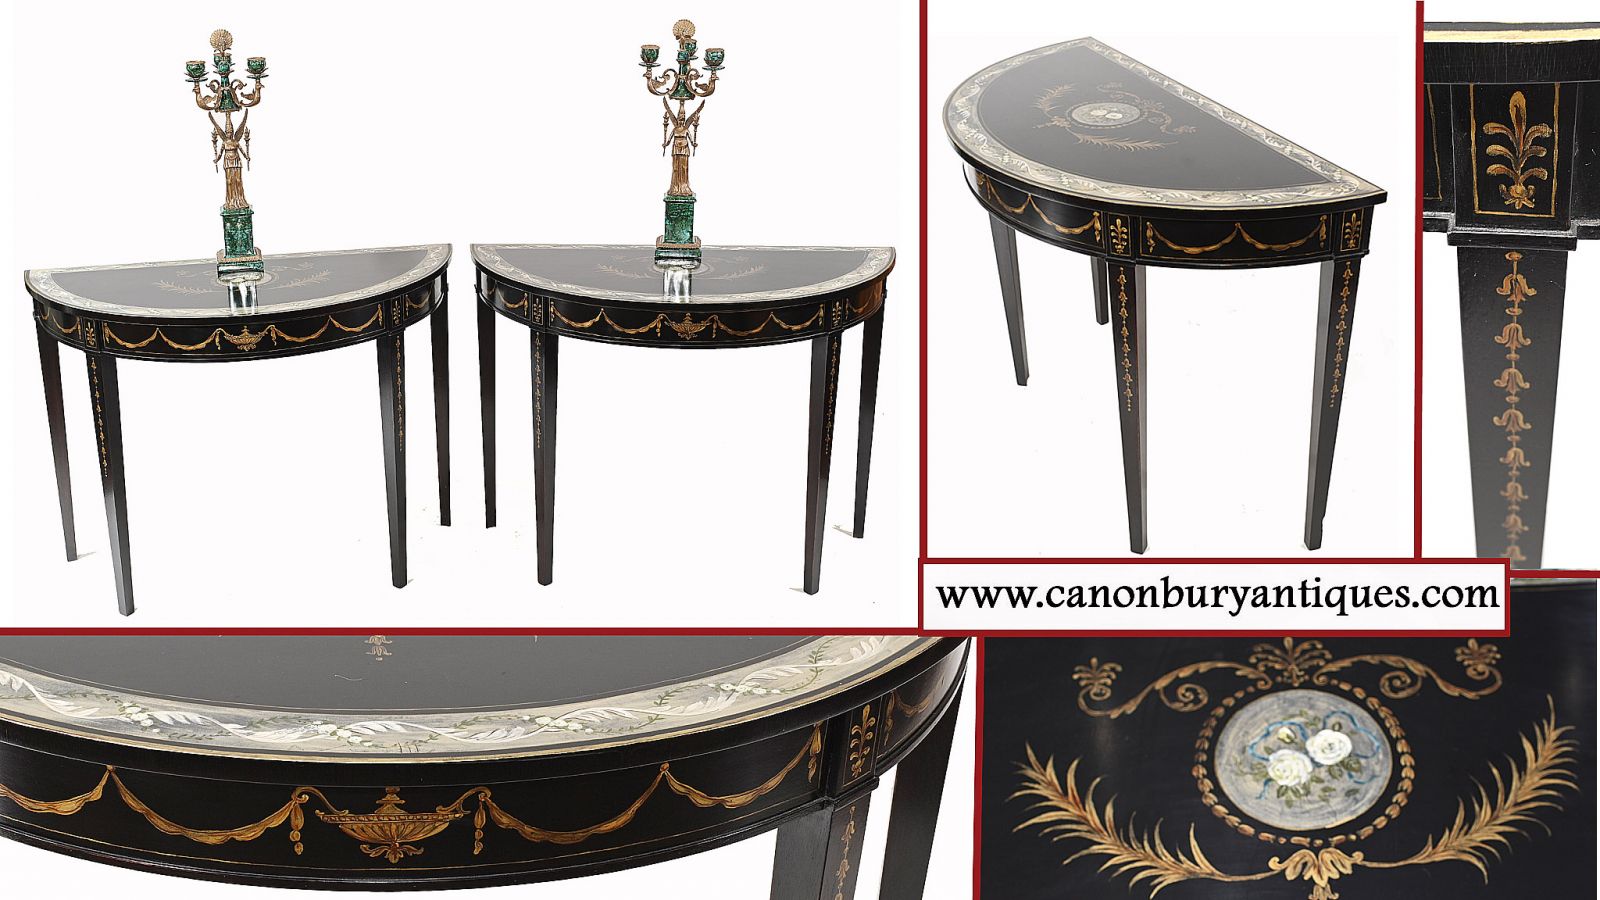 Lacquer console tables painted Regency